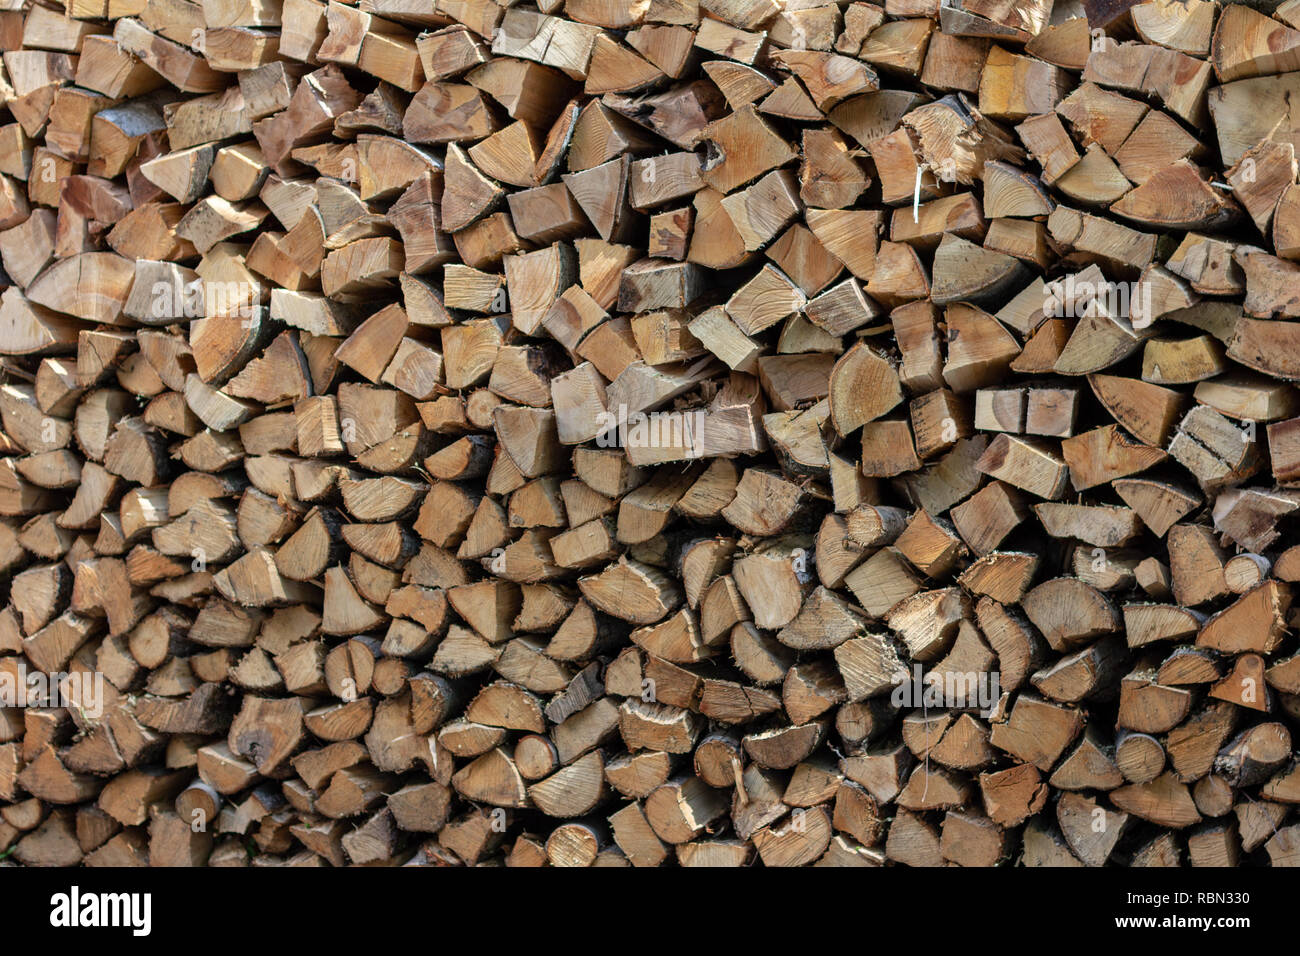 A stack of firewood sits in a pile ready for burning Stock Photo